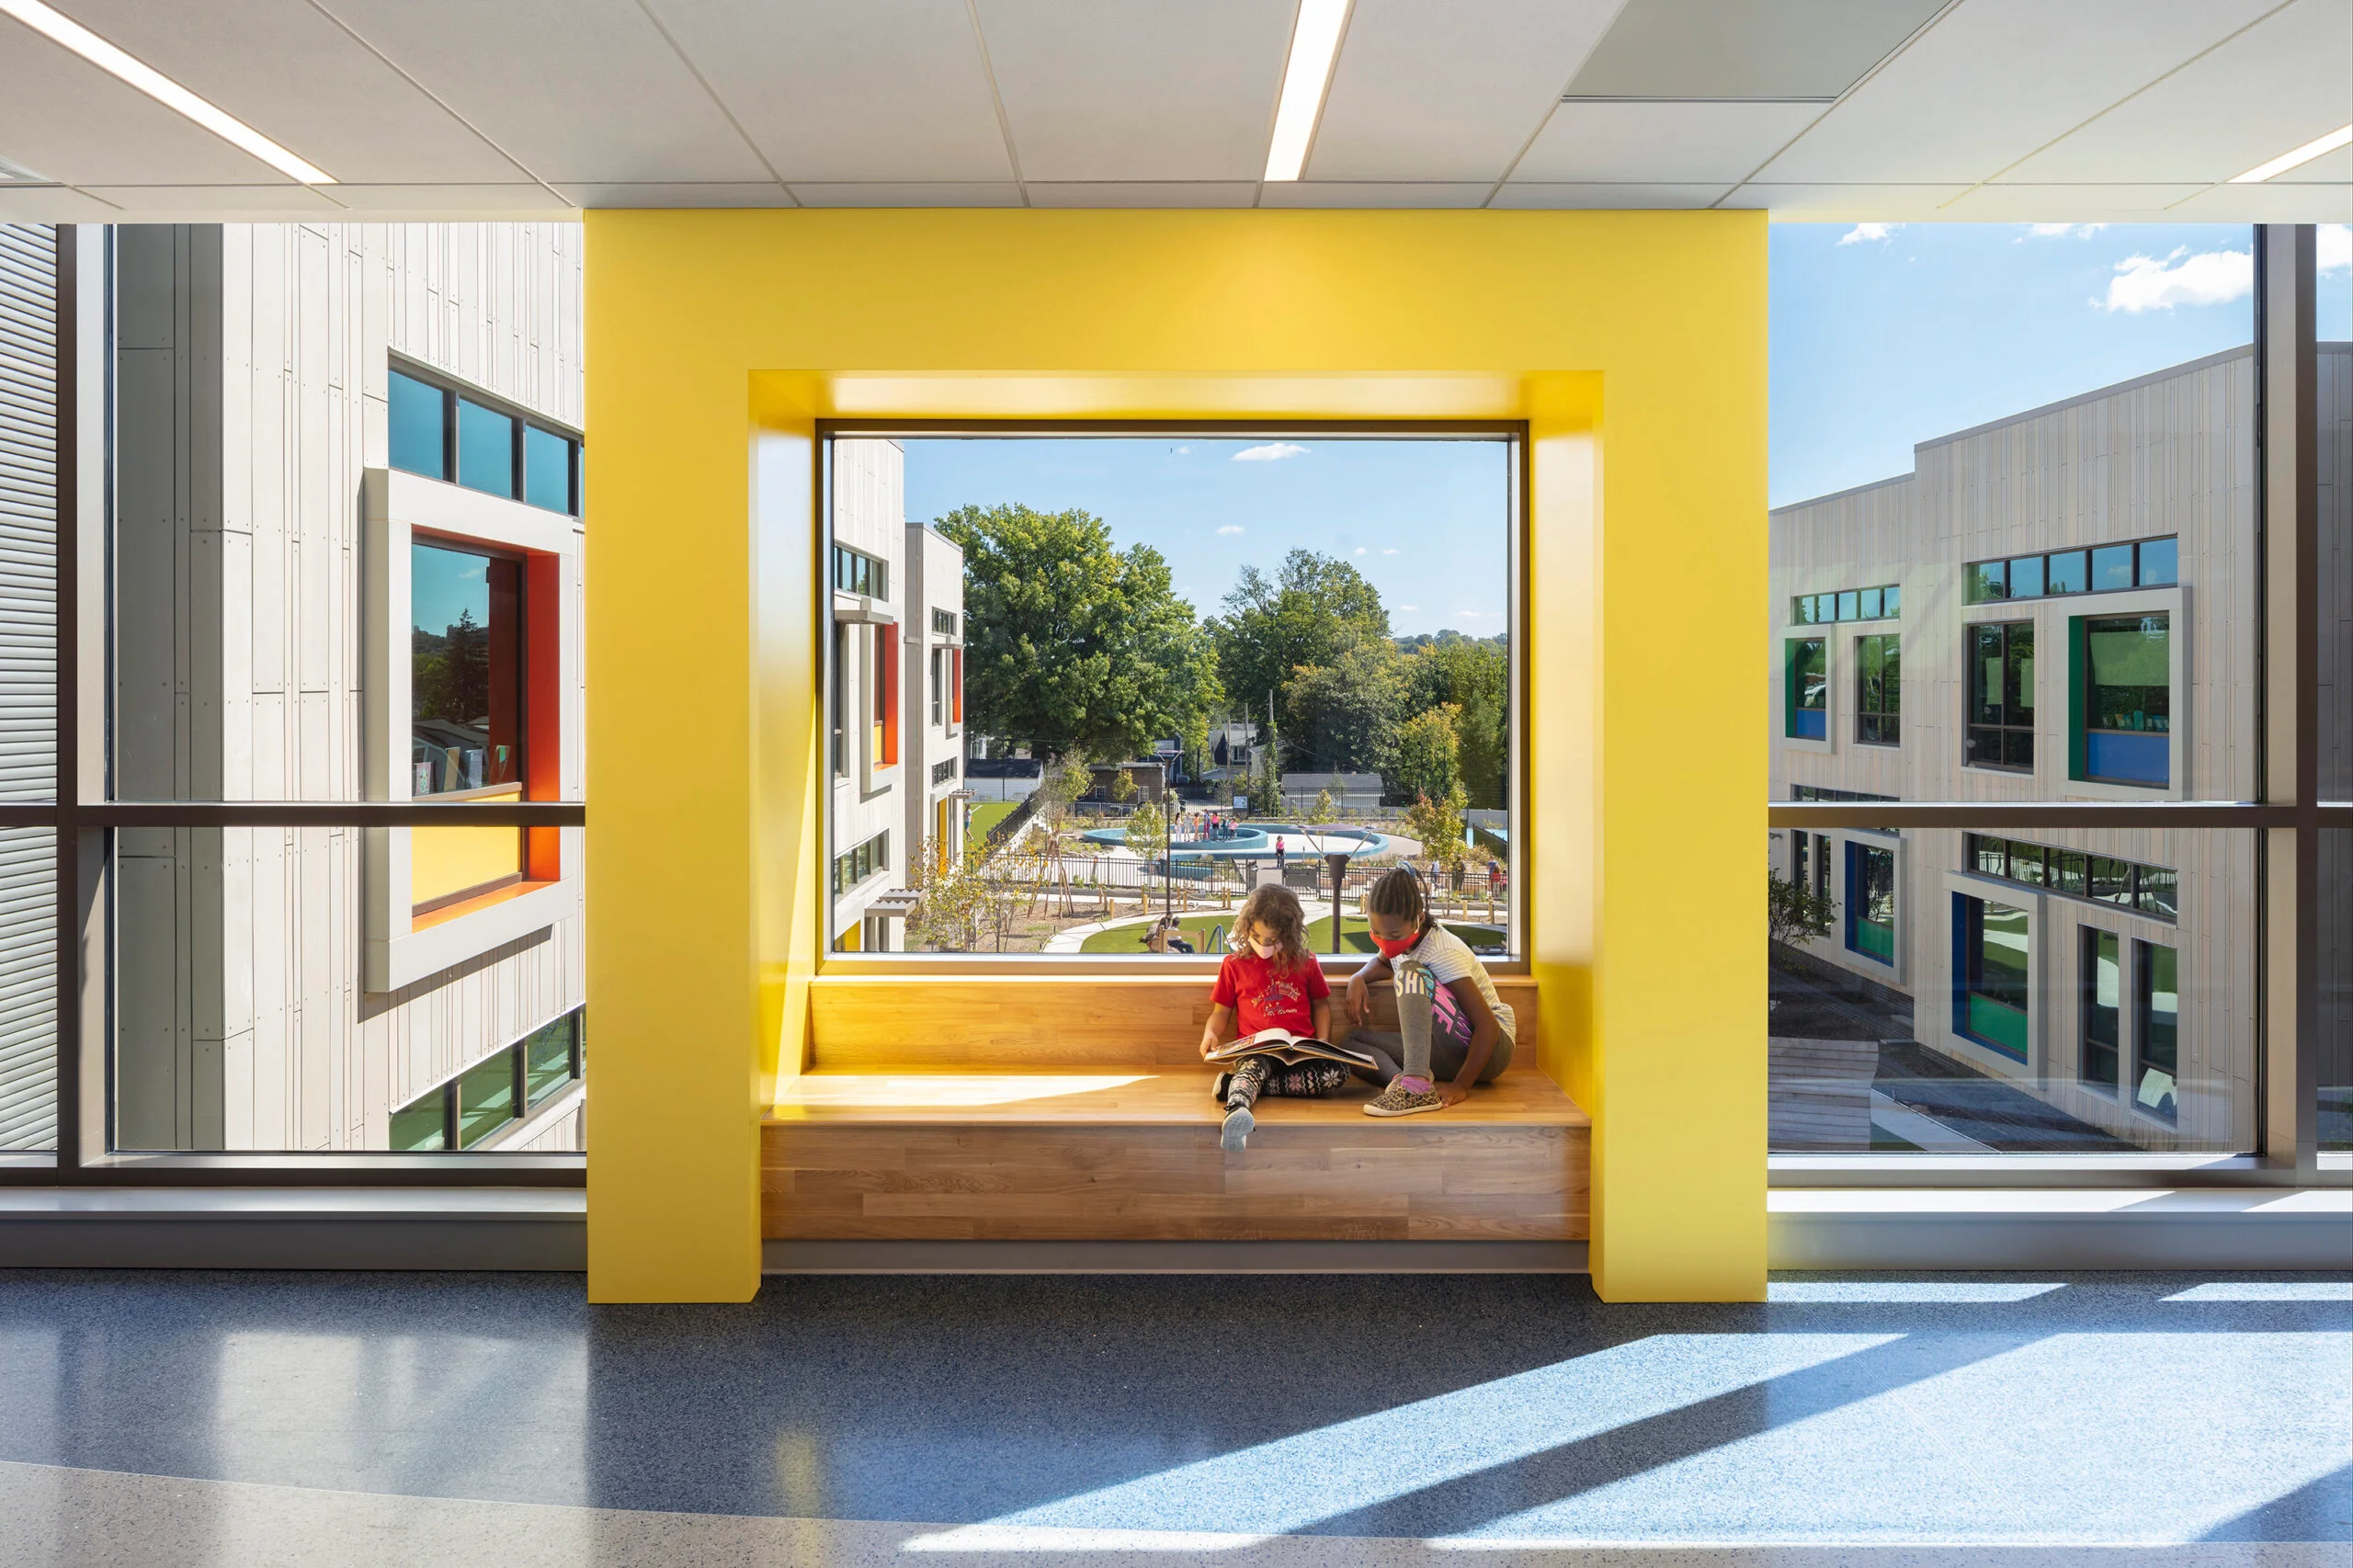 World's first K-12 school to achieve both LEED for Schools Platinum and WELL Platinum -  John Lewis Elementary School